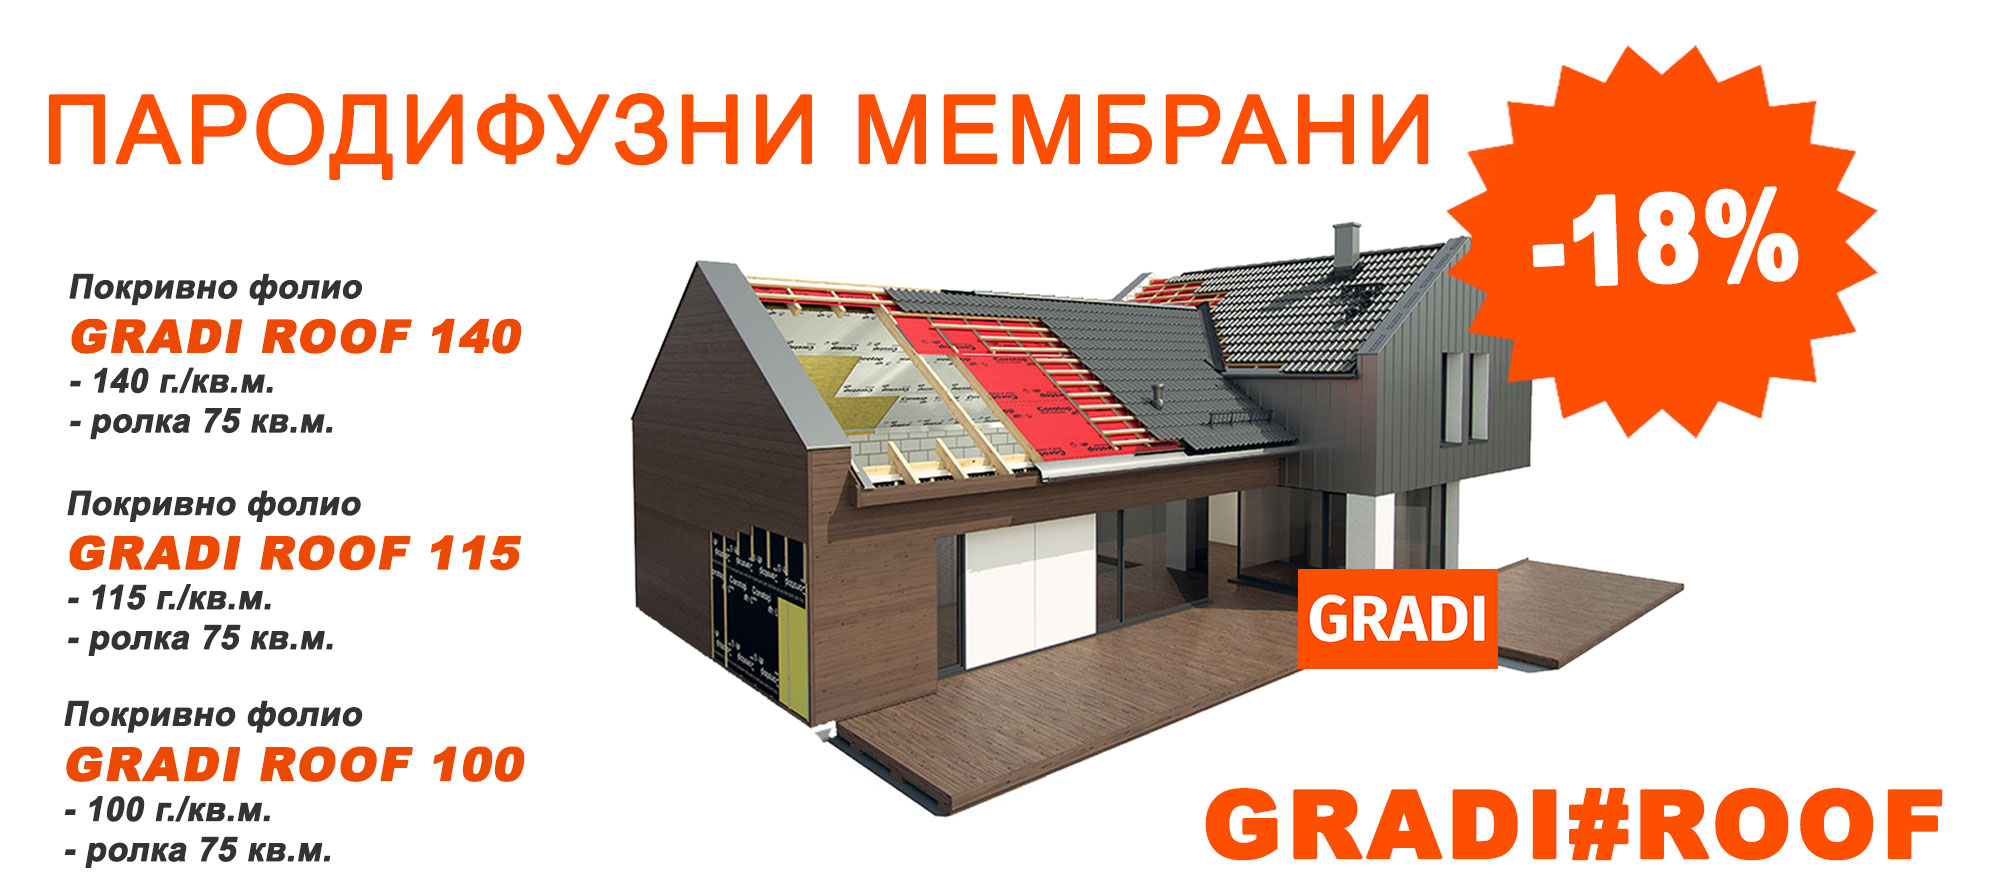 Vapor diffusion membranes GRADI#ROOF with a 18% discount